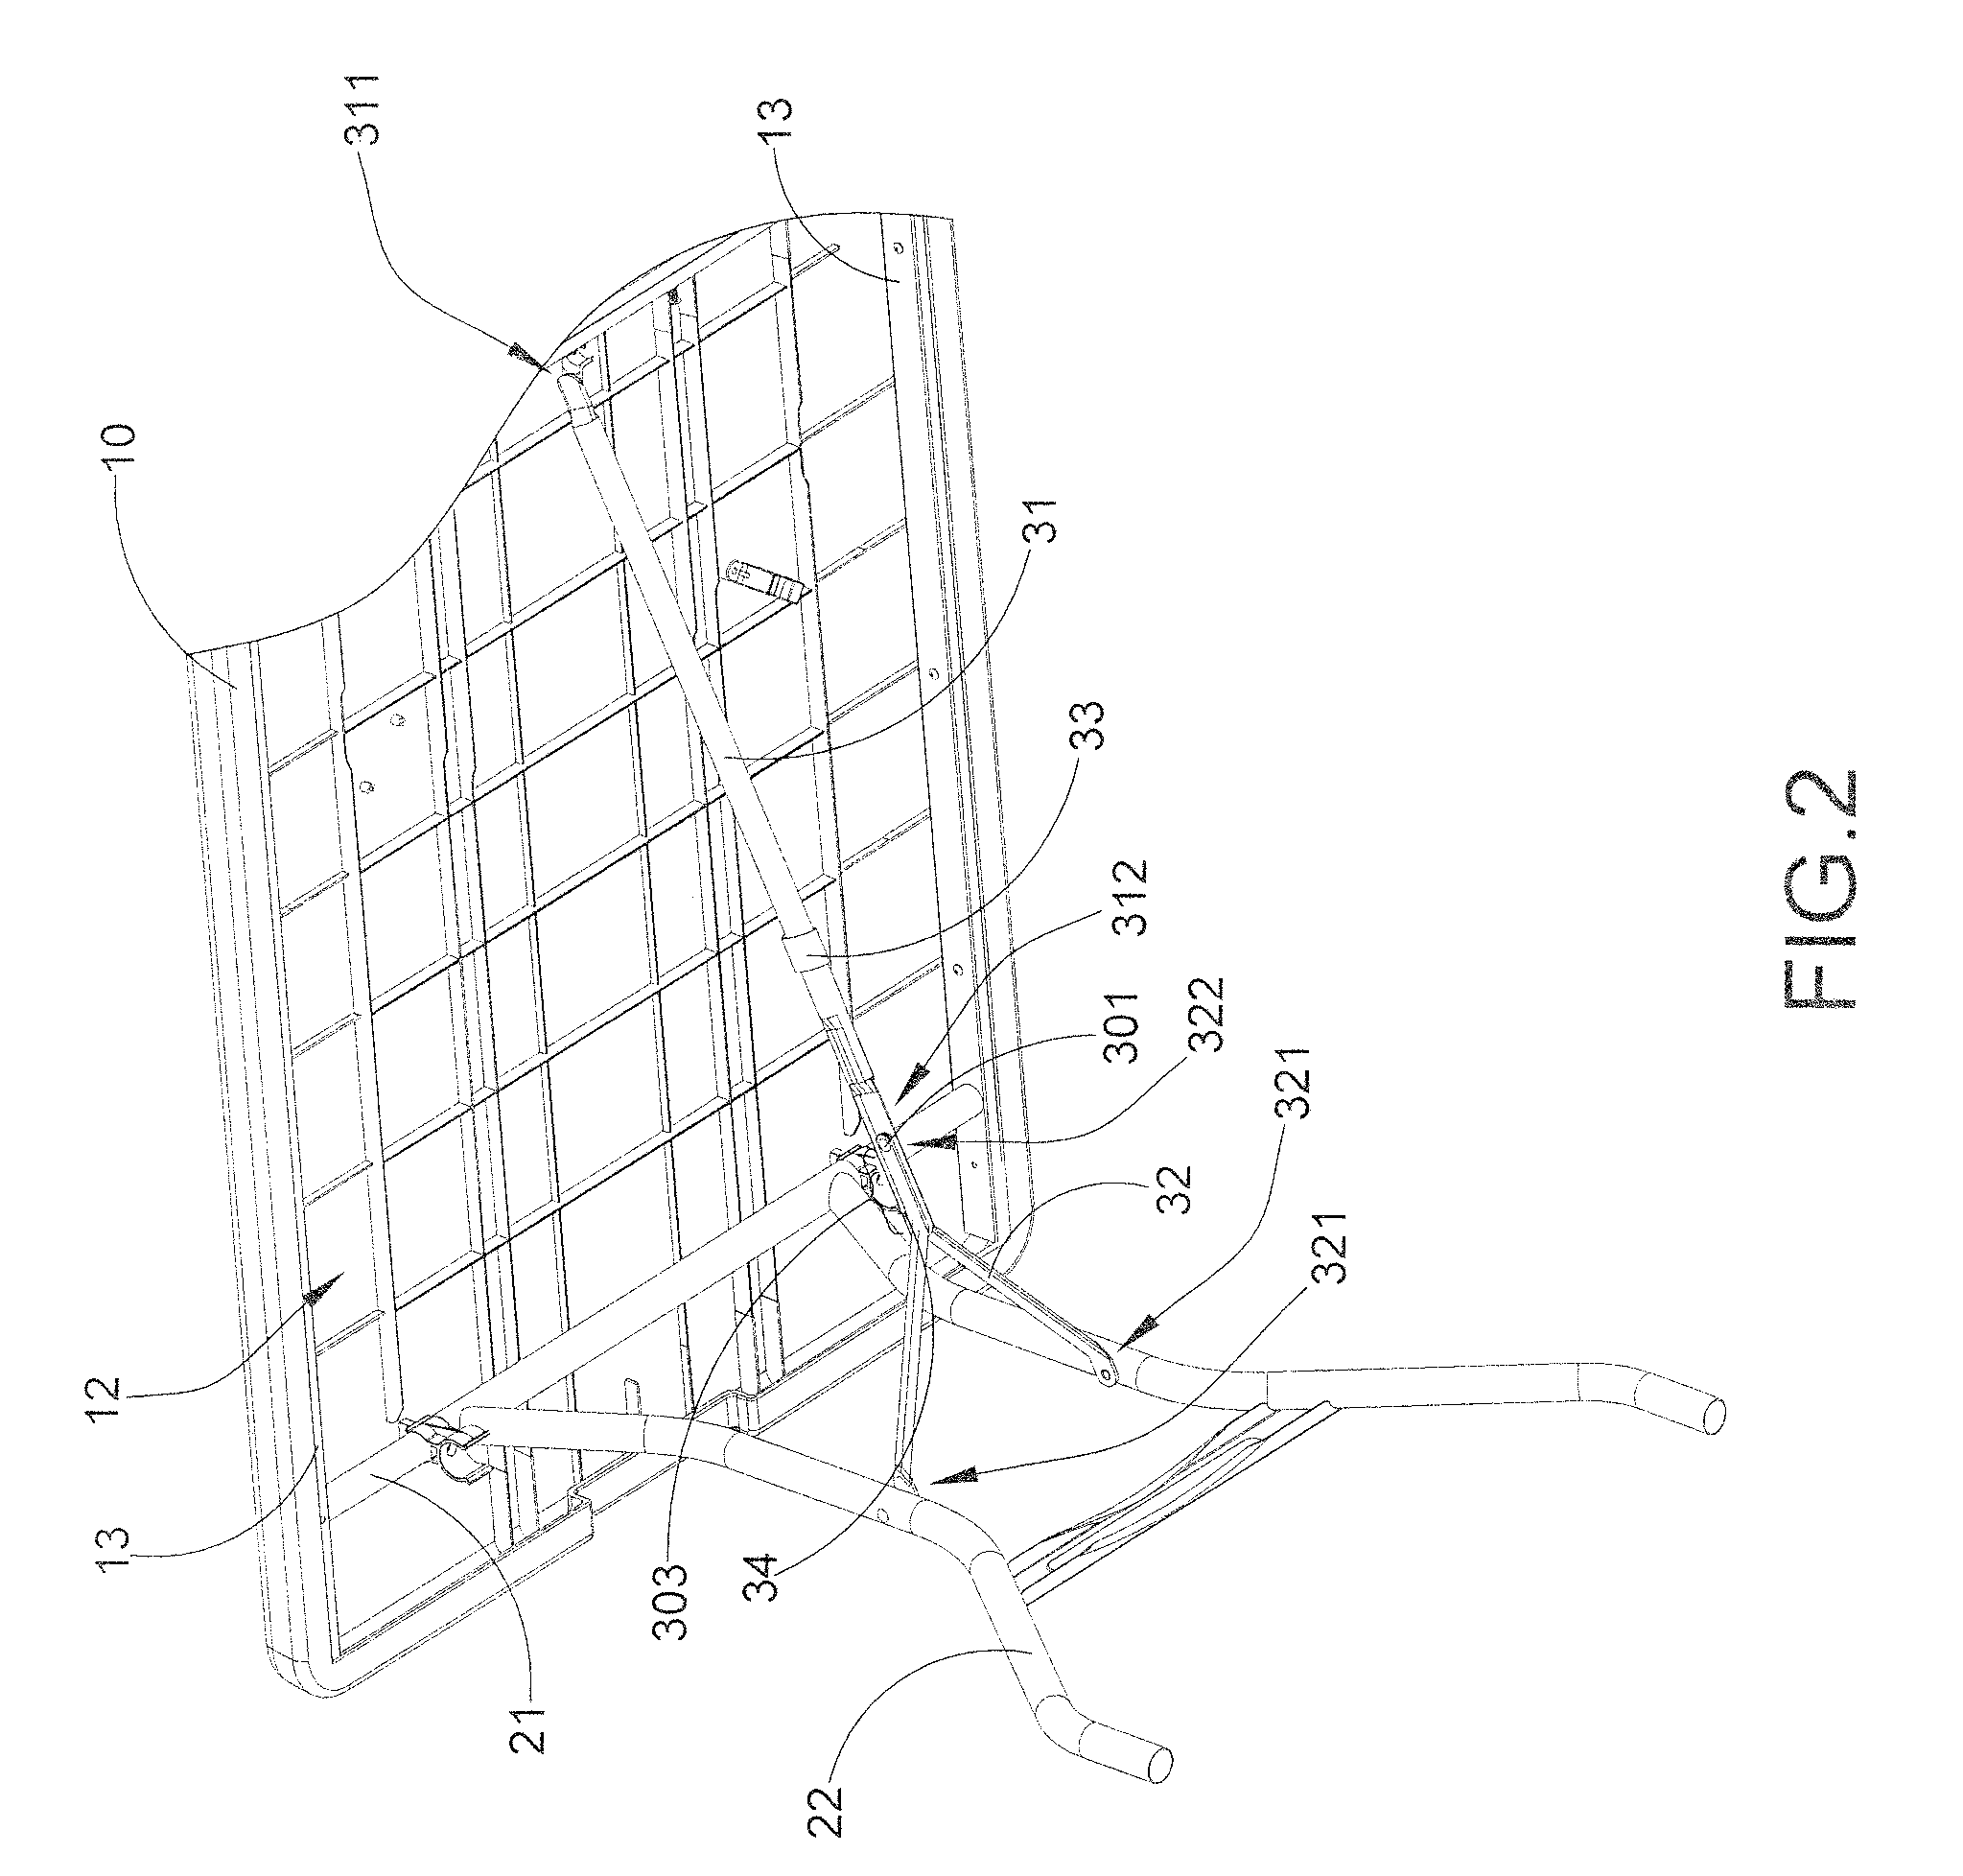 Anti-unfolding leg assembly for foldable table